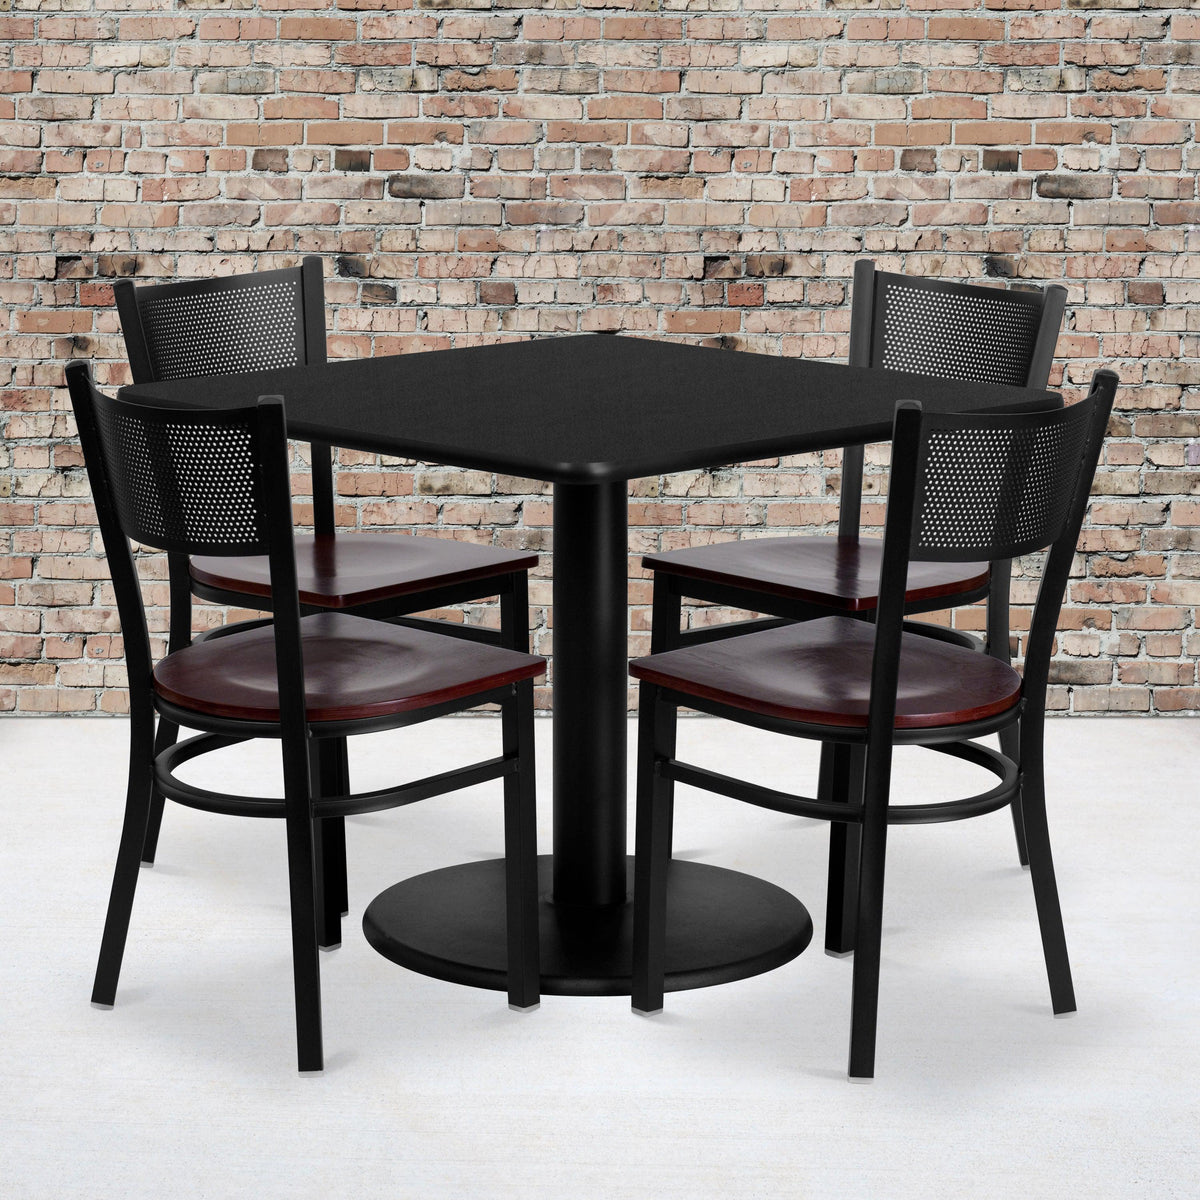 36inch Square Black Laminate Table Set with 4 Metal Chairs - Mahogany Wood Seat